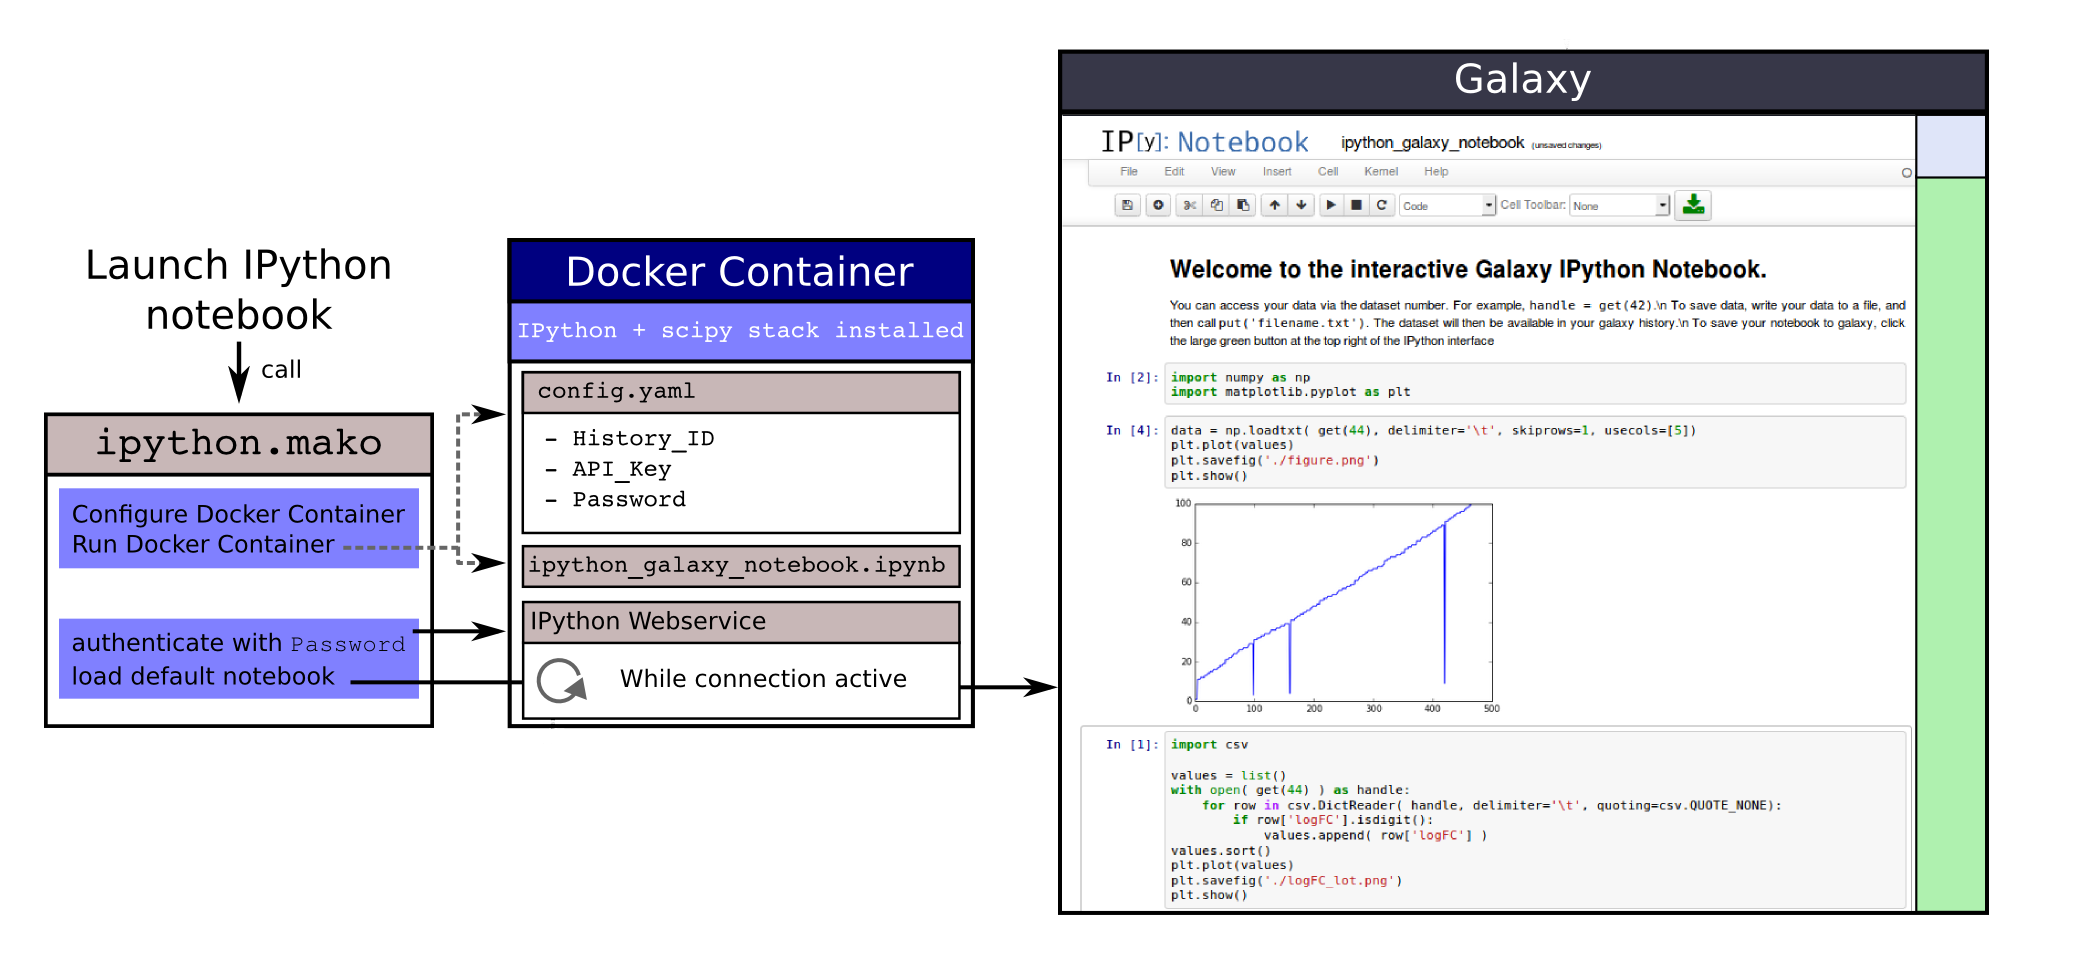 schematic of GIE with a box on the left labelled ipython.mako being invoked by a launch ipython notebook call. This has boxes for running a docker container and then proxying authentication. These point to a docker container with a config.yaml containing the history id, api key and password, the ipython galaxy notebook, and the ipython webservice which loops while the connection is active. This proxies the connection and points to a cartoon of ipython in galaxy's center panel.